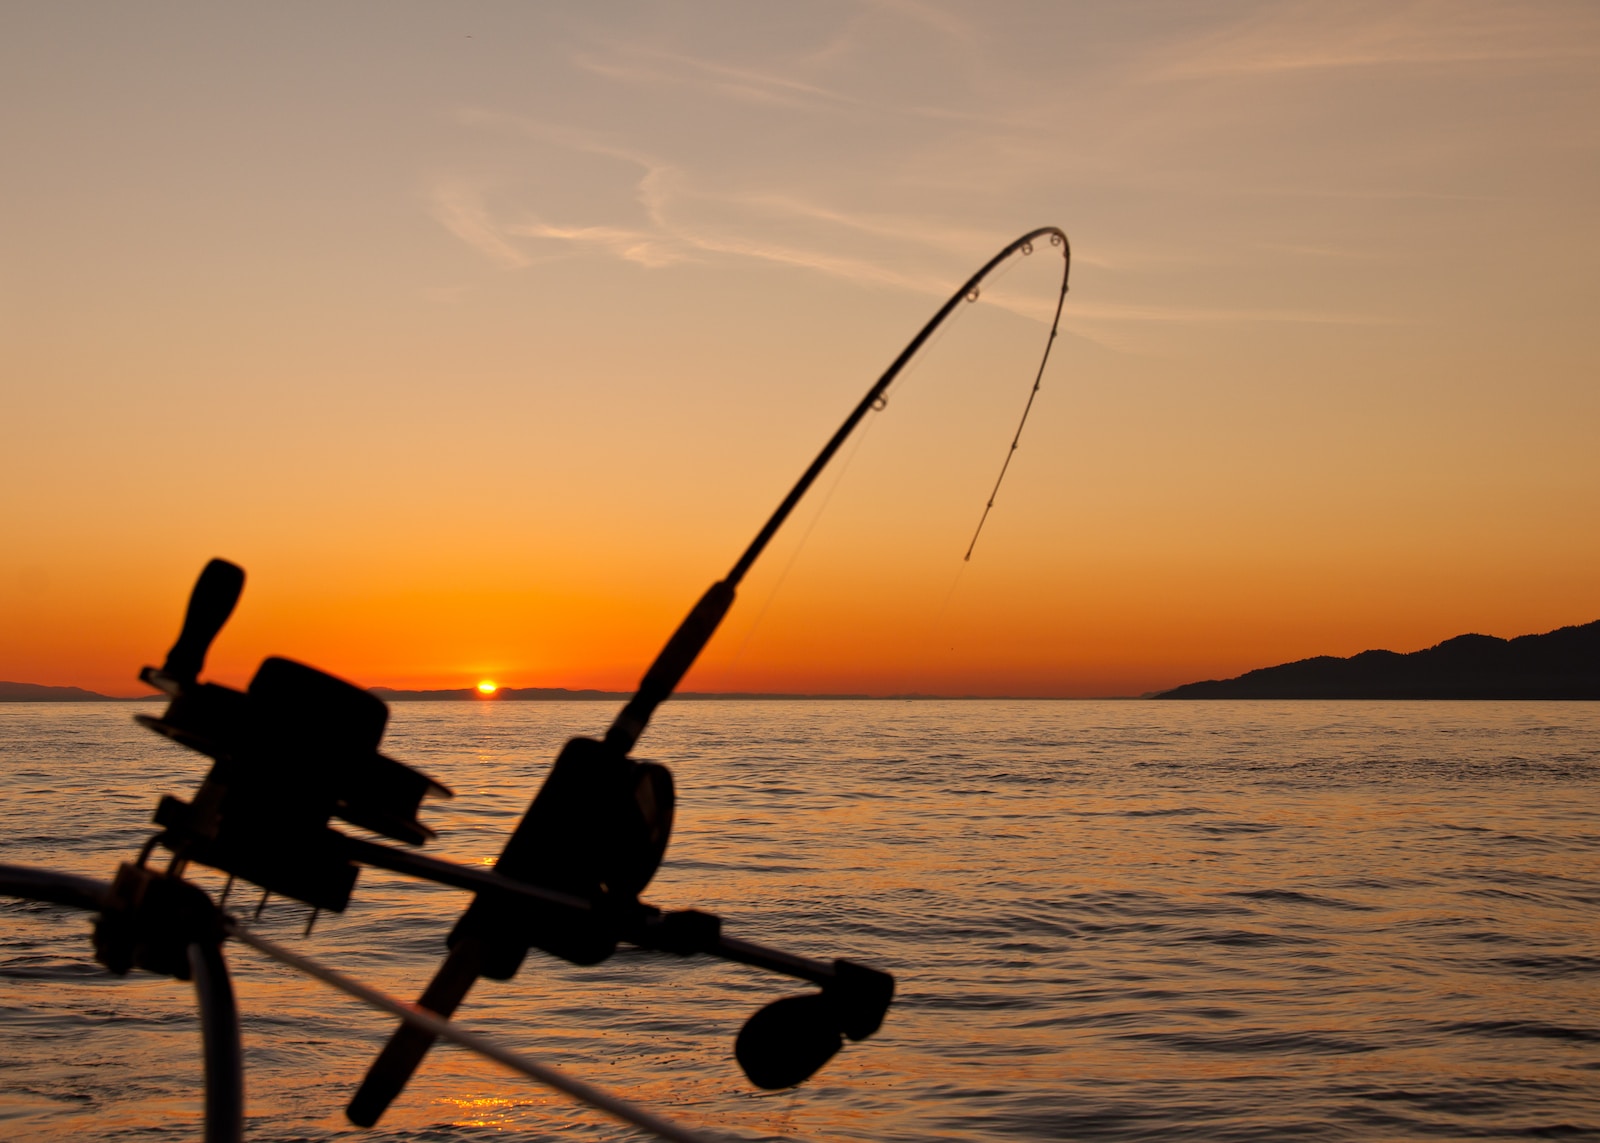 DIY Fishing Pole black fishing rod and body of water during golden hour